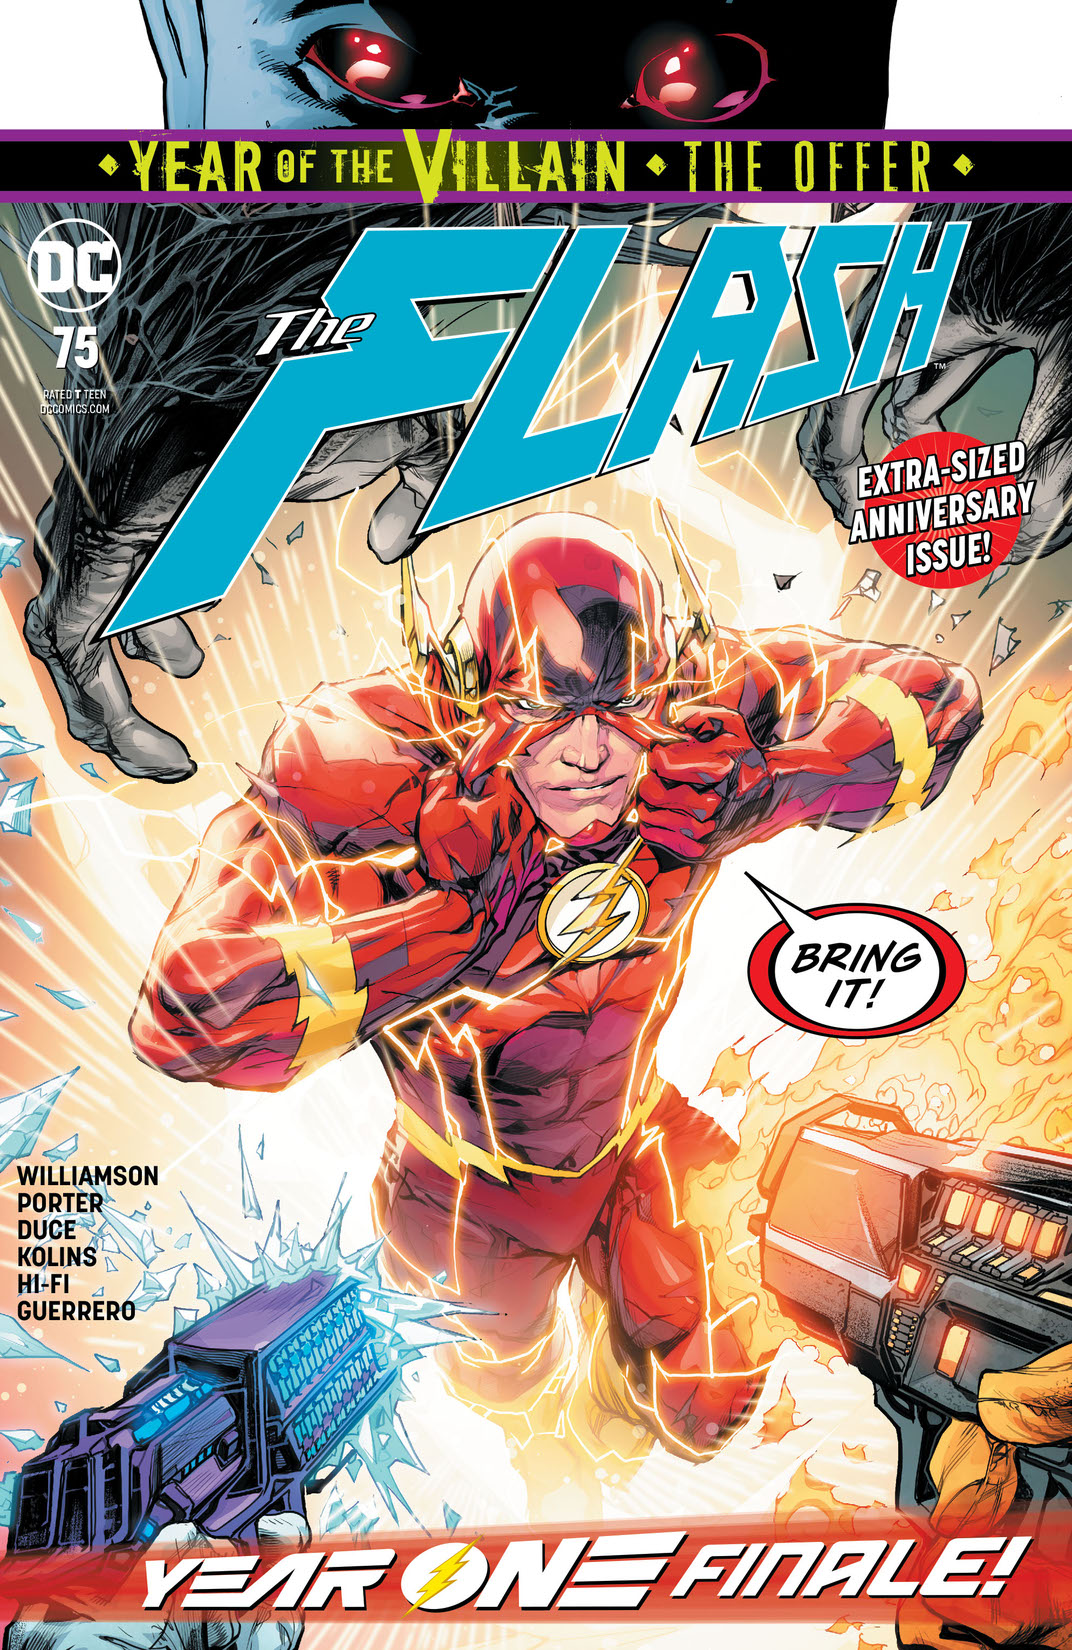 The Flash (2016-) #75 preview images